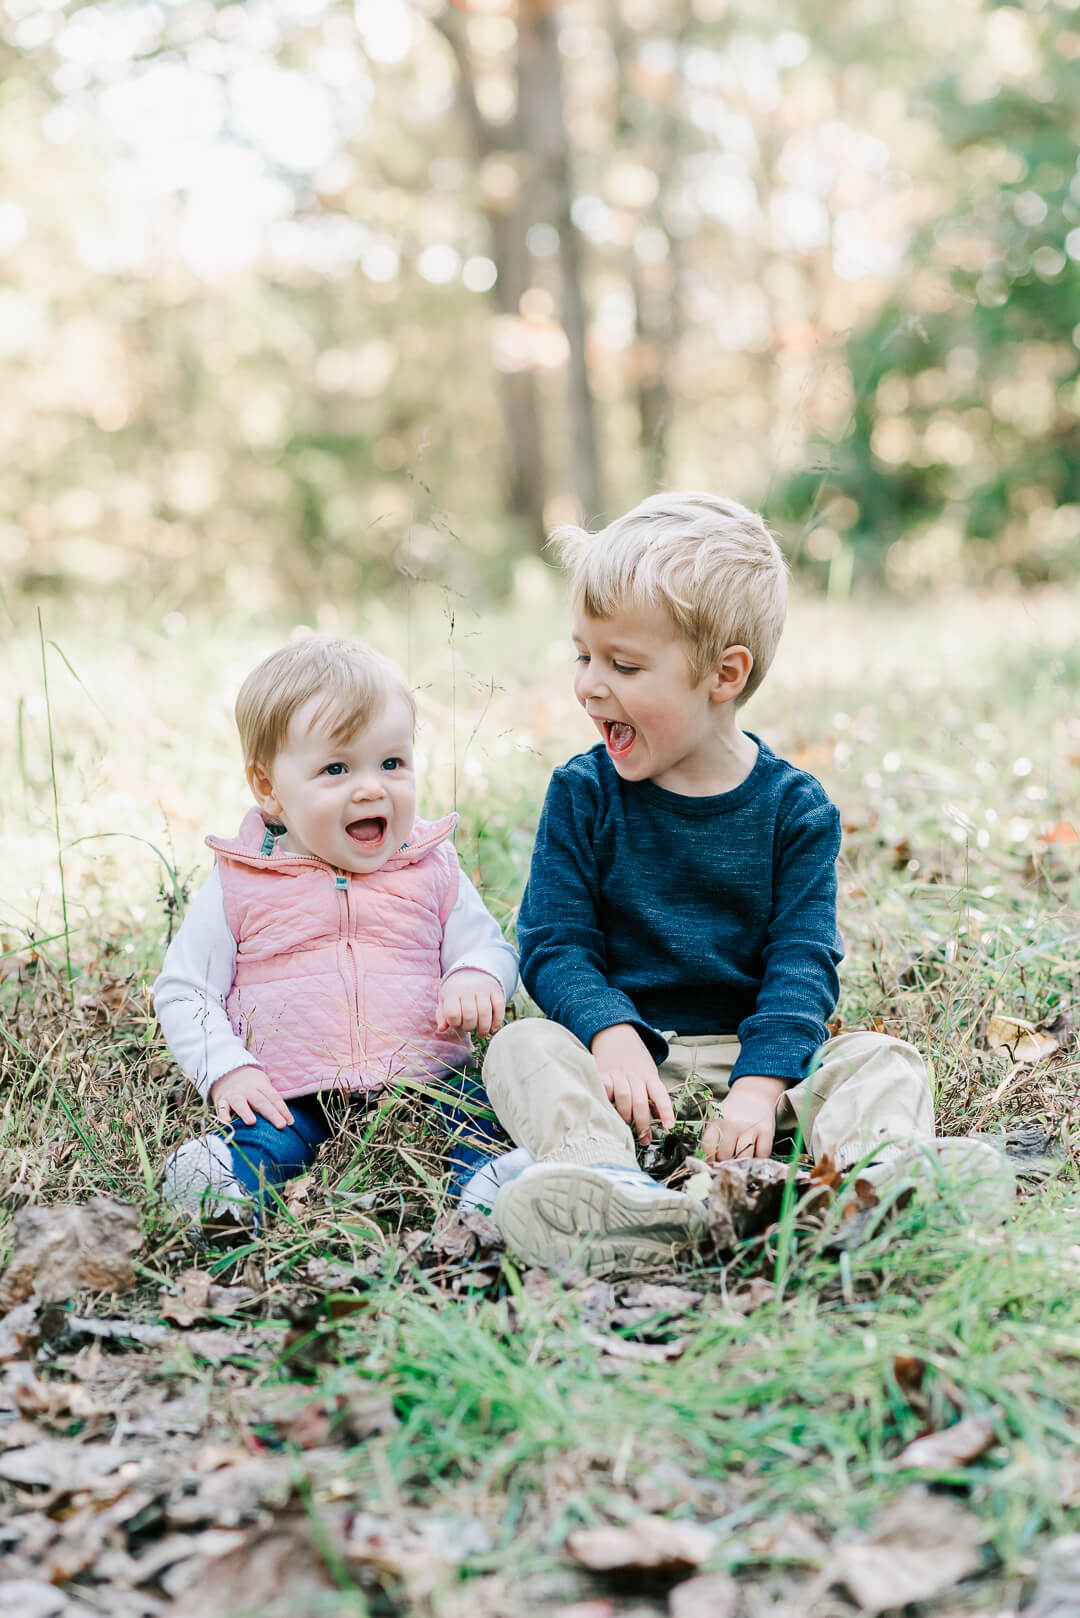 A happy toddler boy laughs and plays with his toddler baby sister in a park field